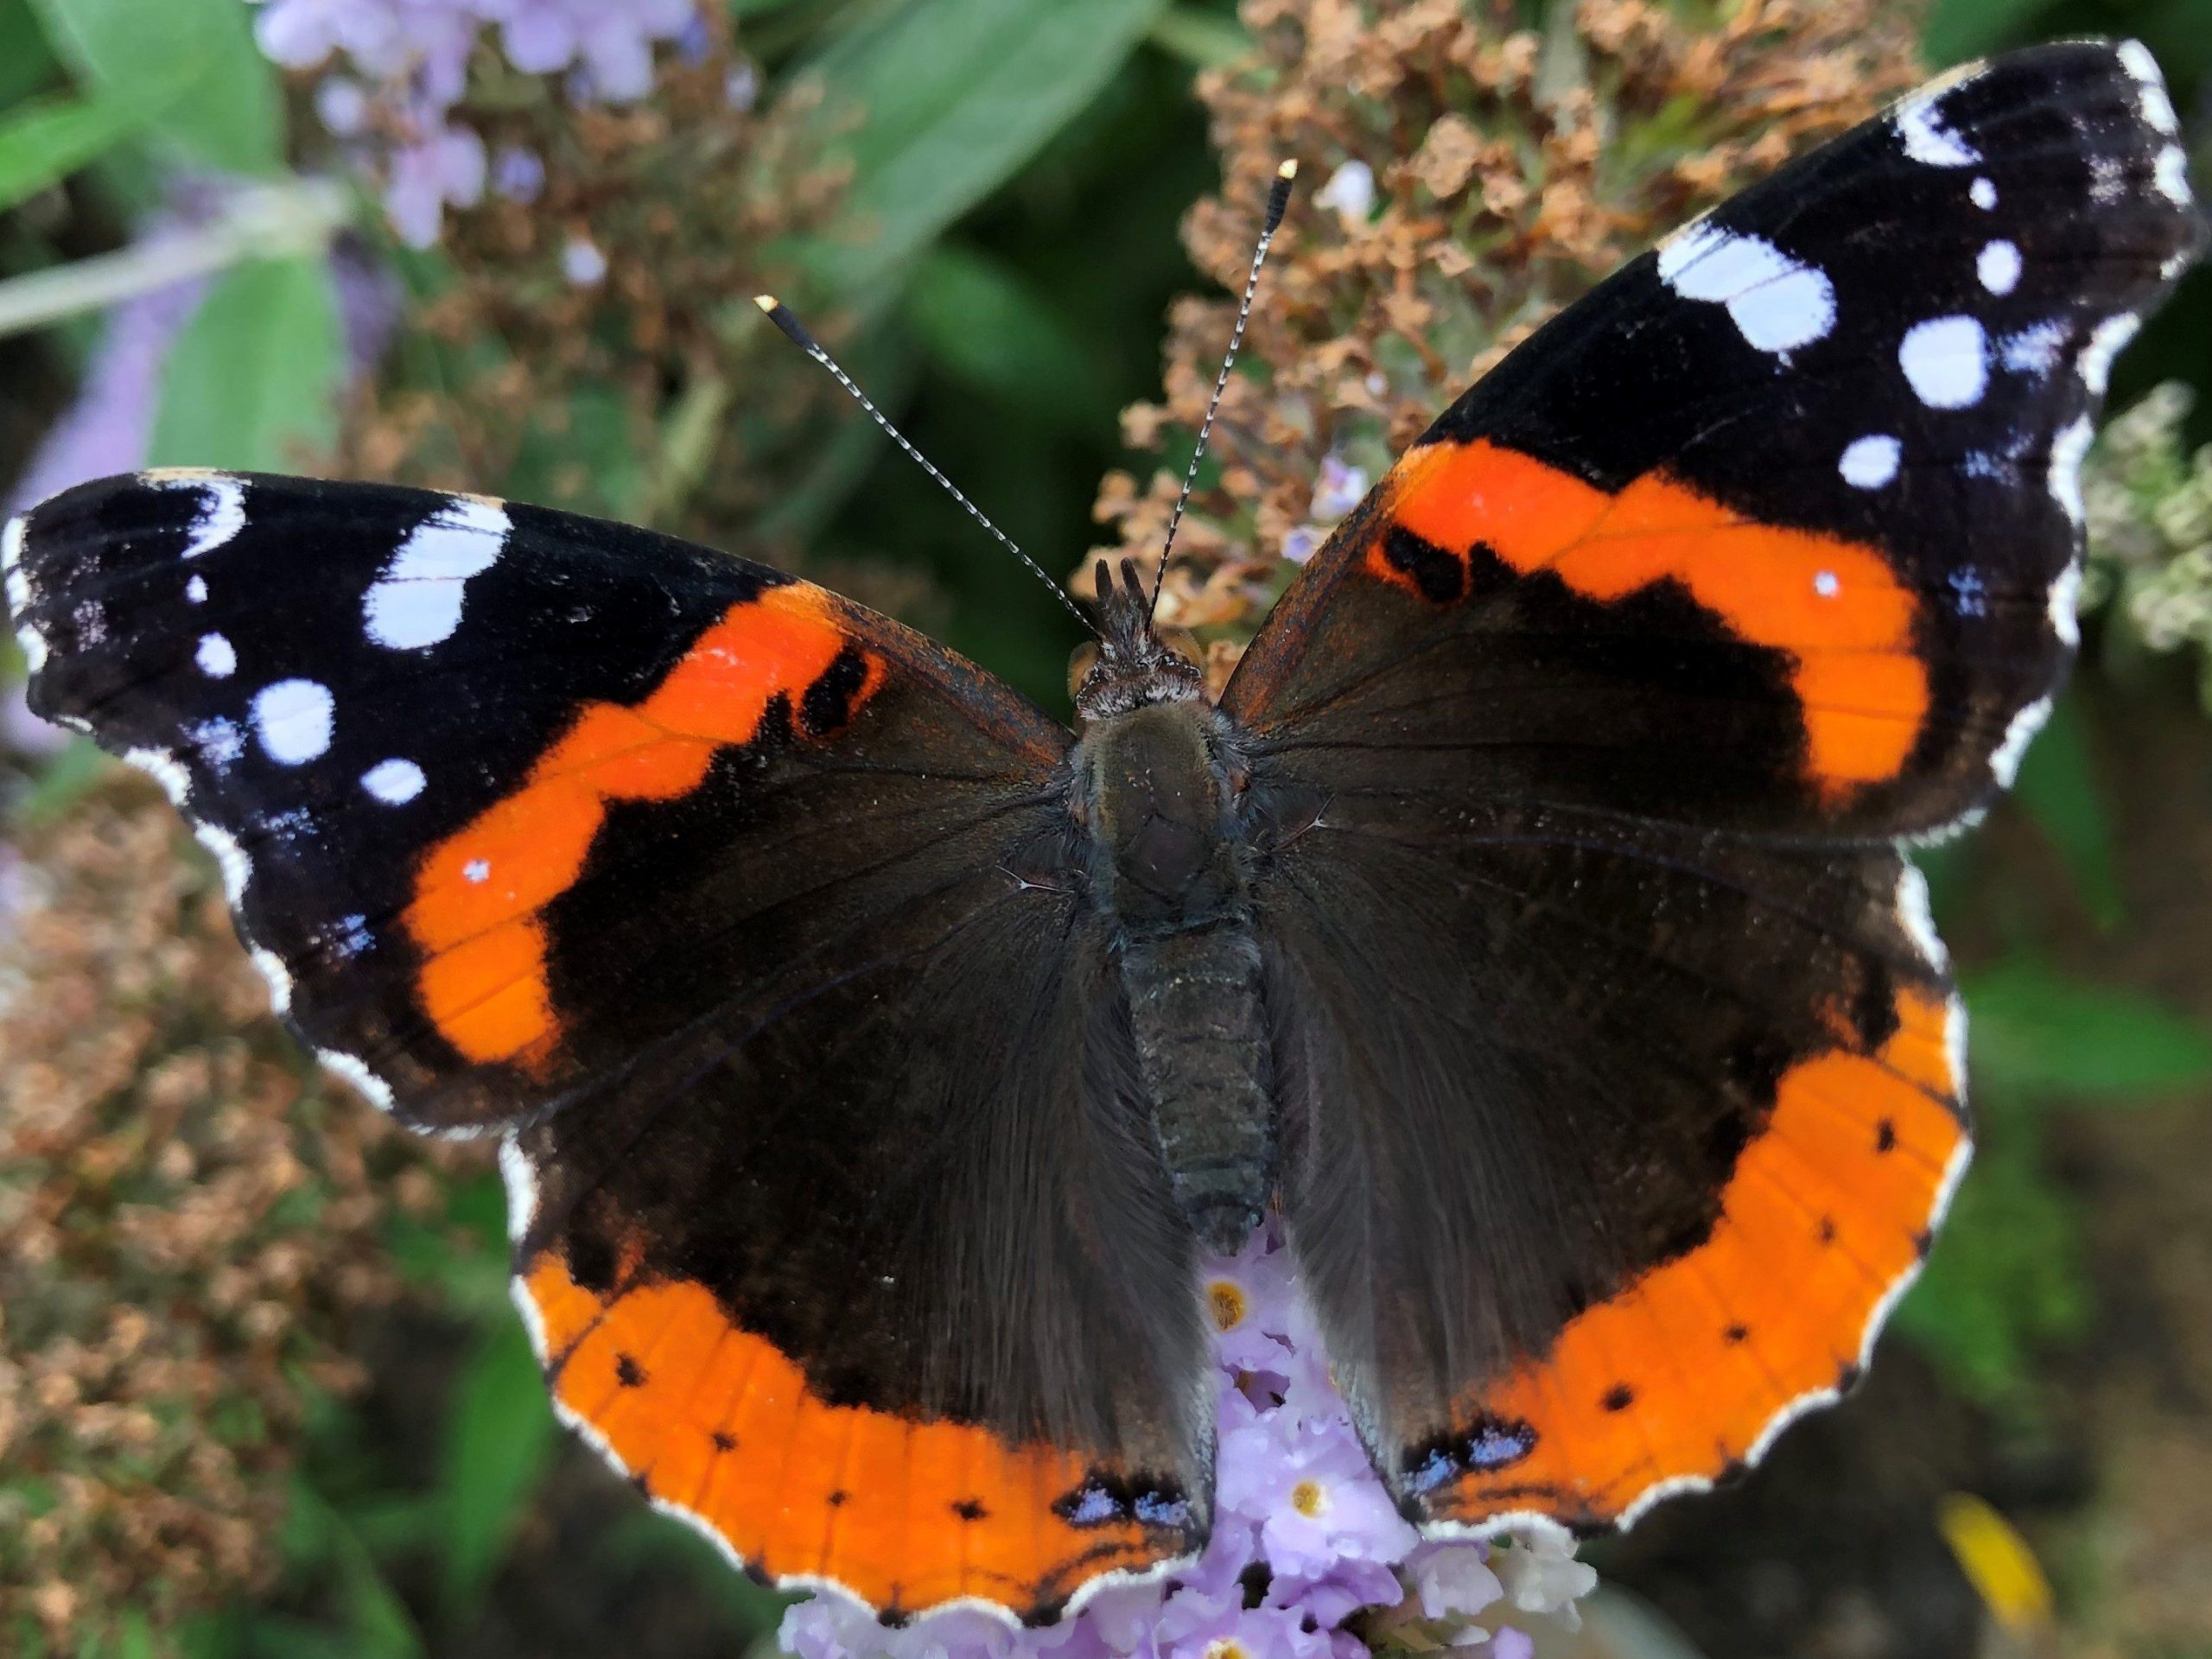 Red Admiral butterfly by Suzanne Herel